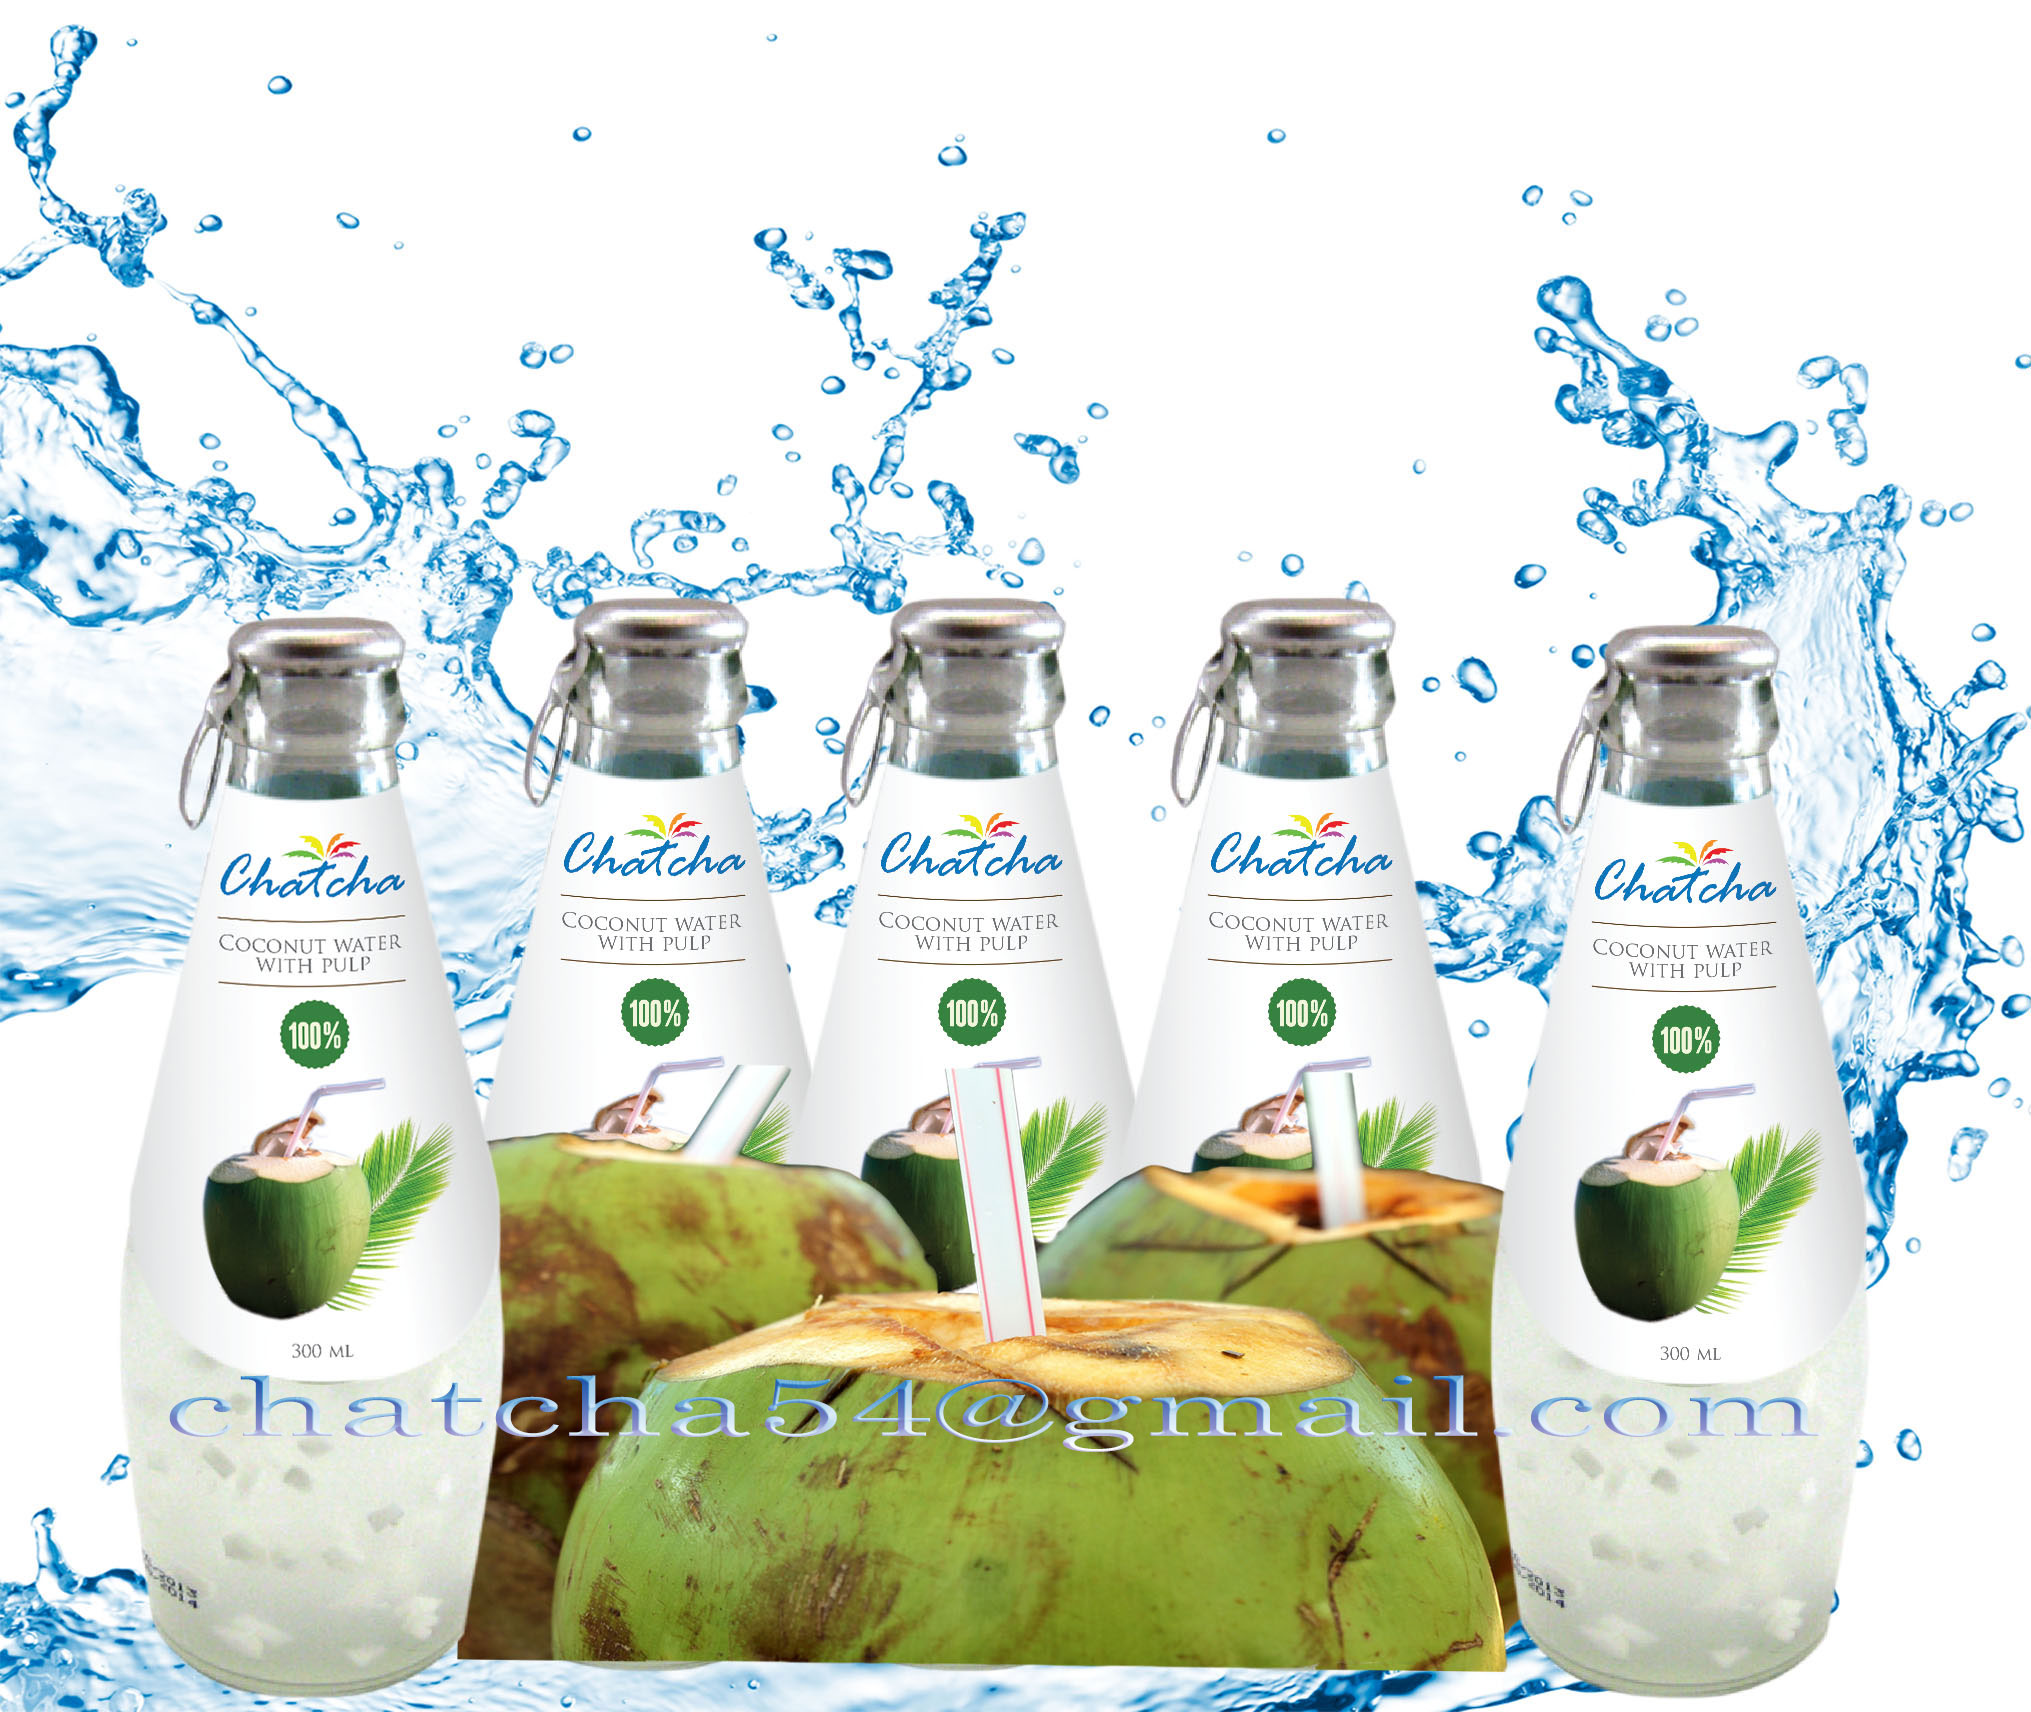 100% coconut water with pulp